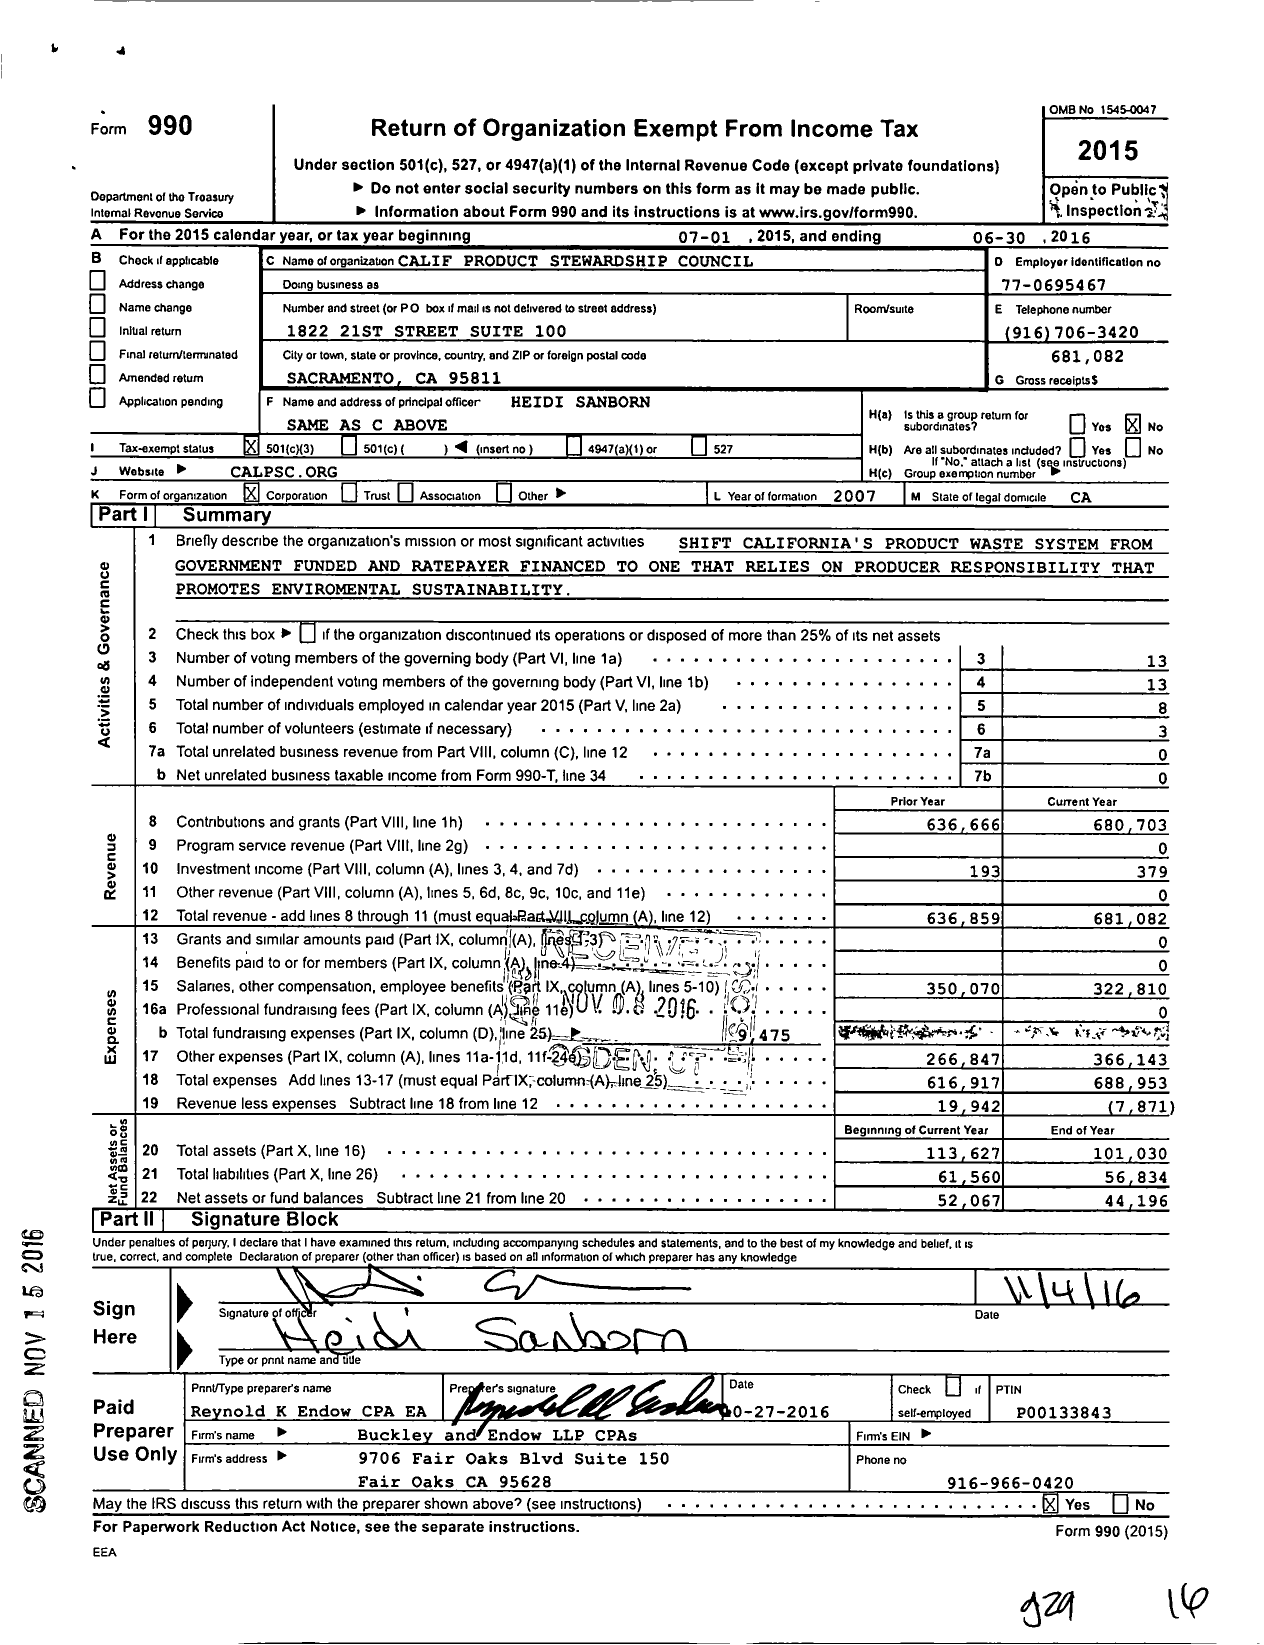 Image of first page of 2015 Form 990 for California Product Stewardship Council